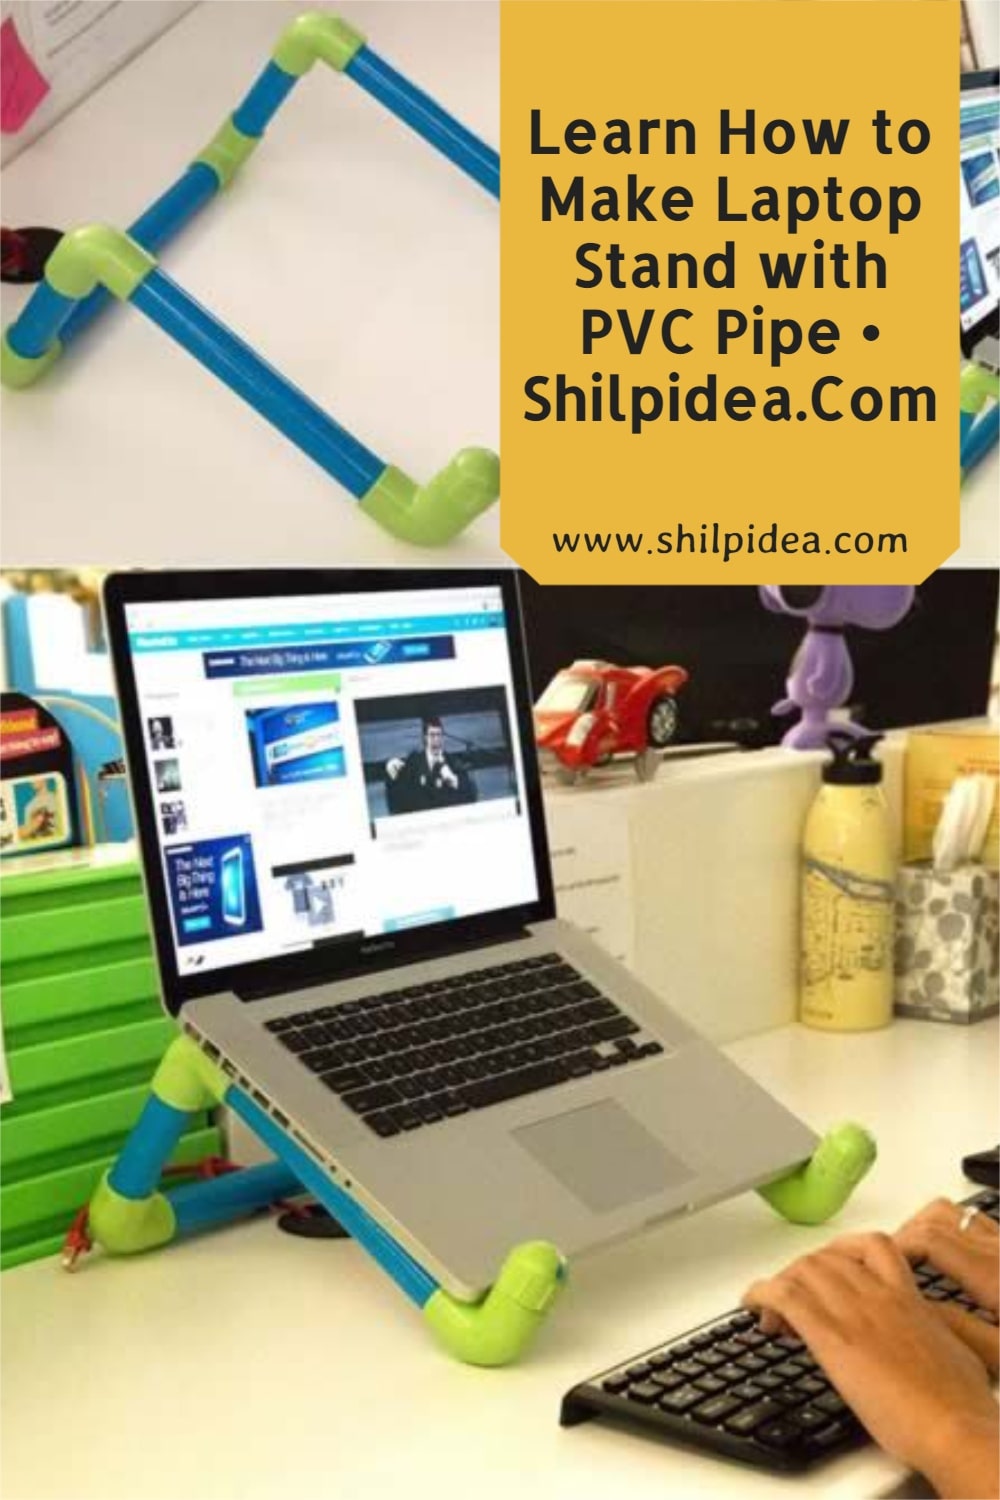 laptop-stand-with-PVC-pipe-shilpidea